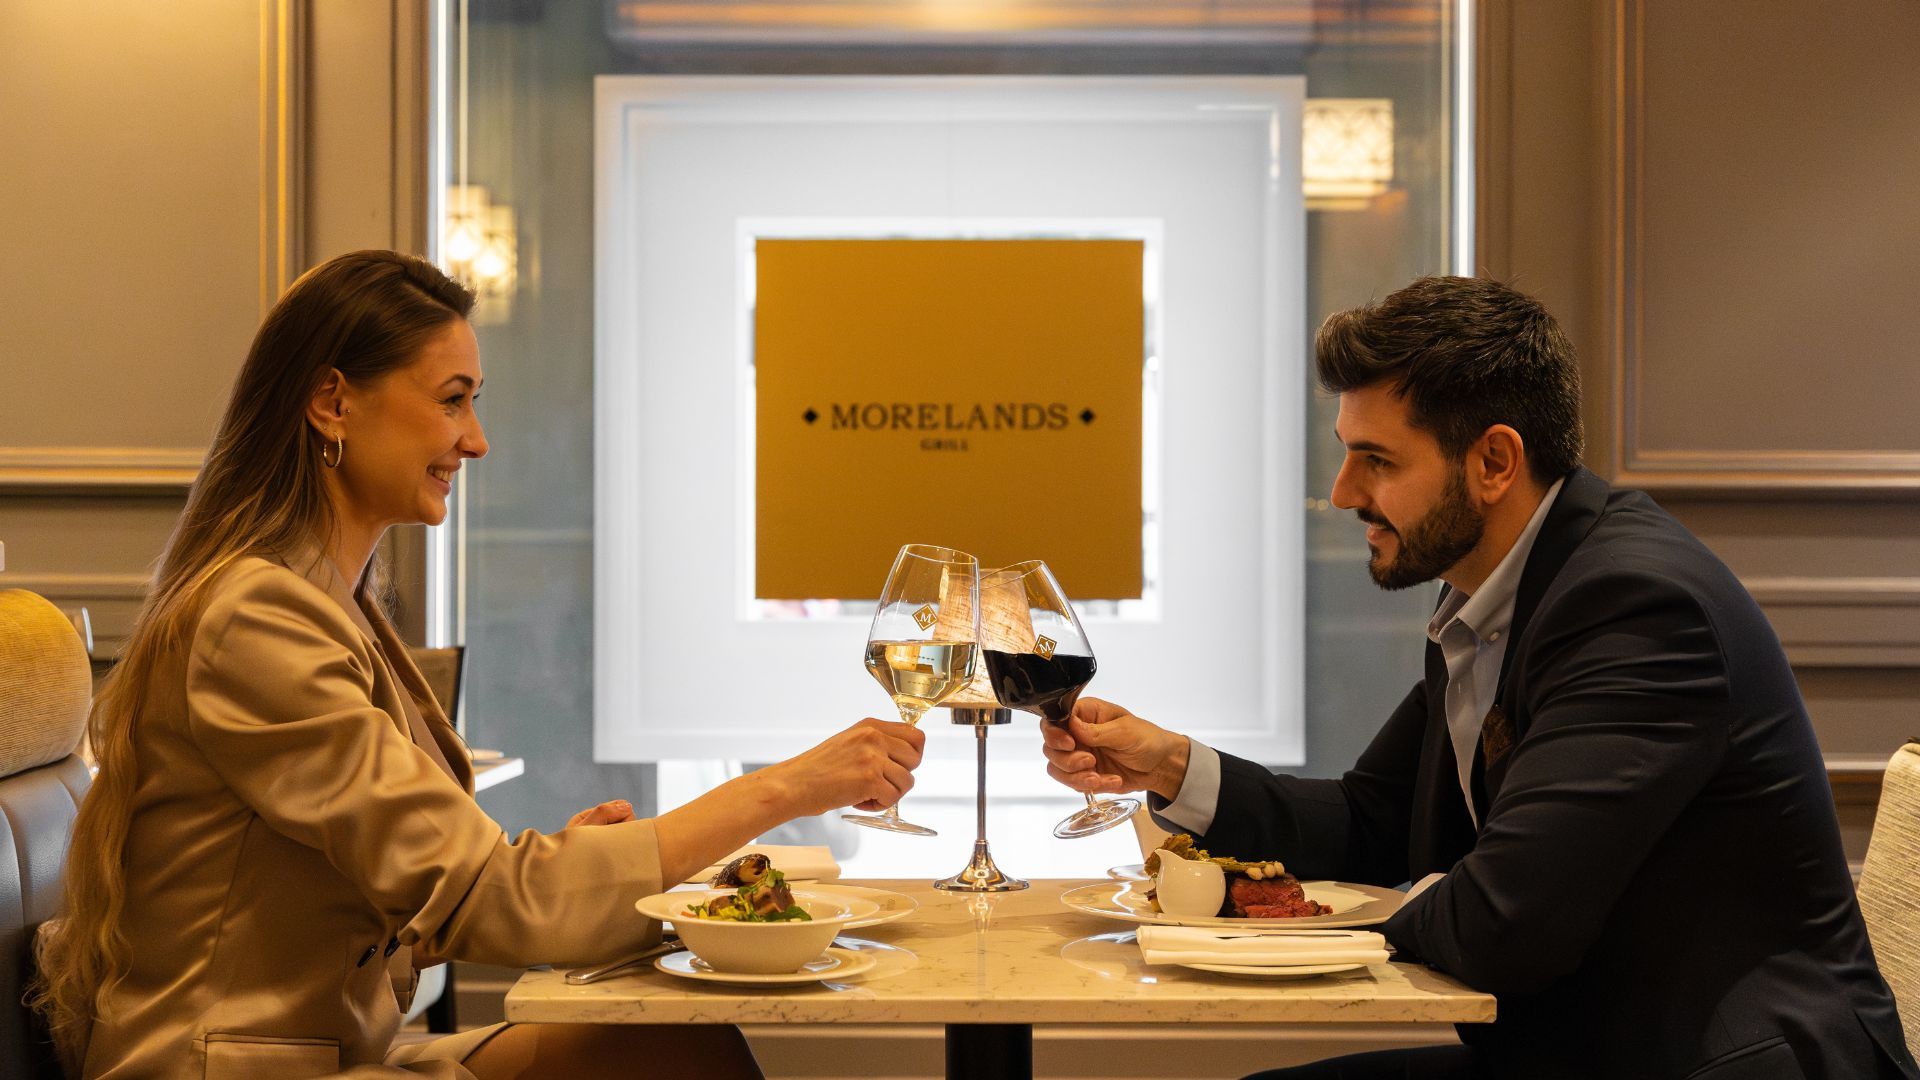 Morelands Grill at The College Green Hotel Dublin